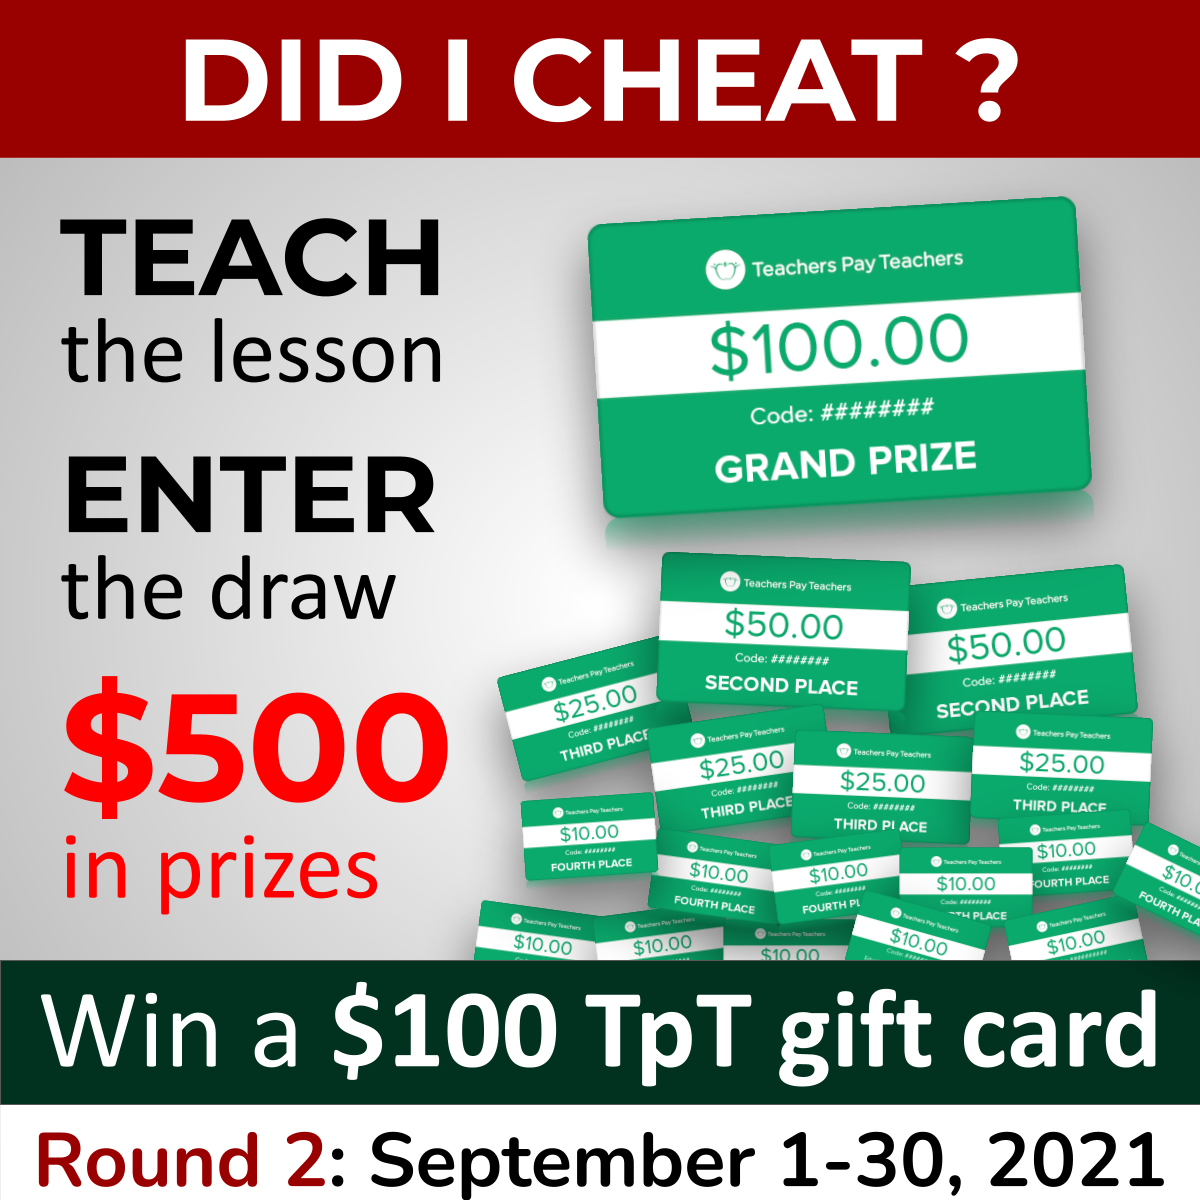 Did I Cheat Round 2 cover 2 - Teach the lesson, enter the draw, $500 in prizes. Win a $100 TpT gift card (grand prize) Round 2: Sep 1-30, 2021